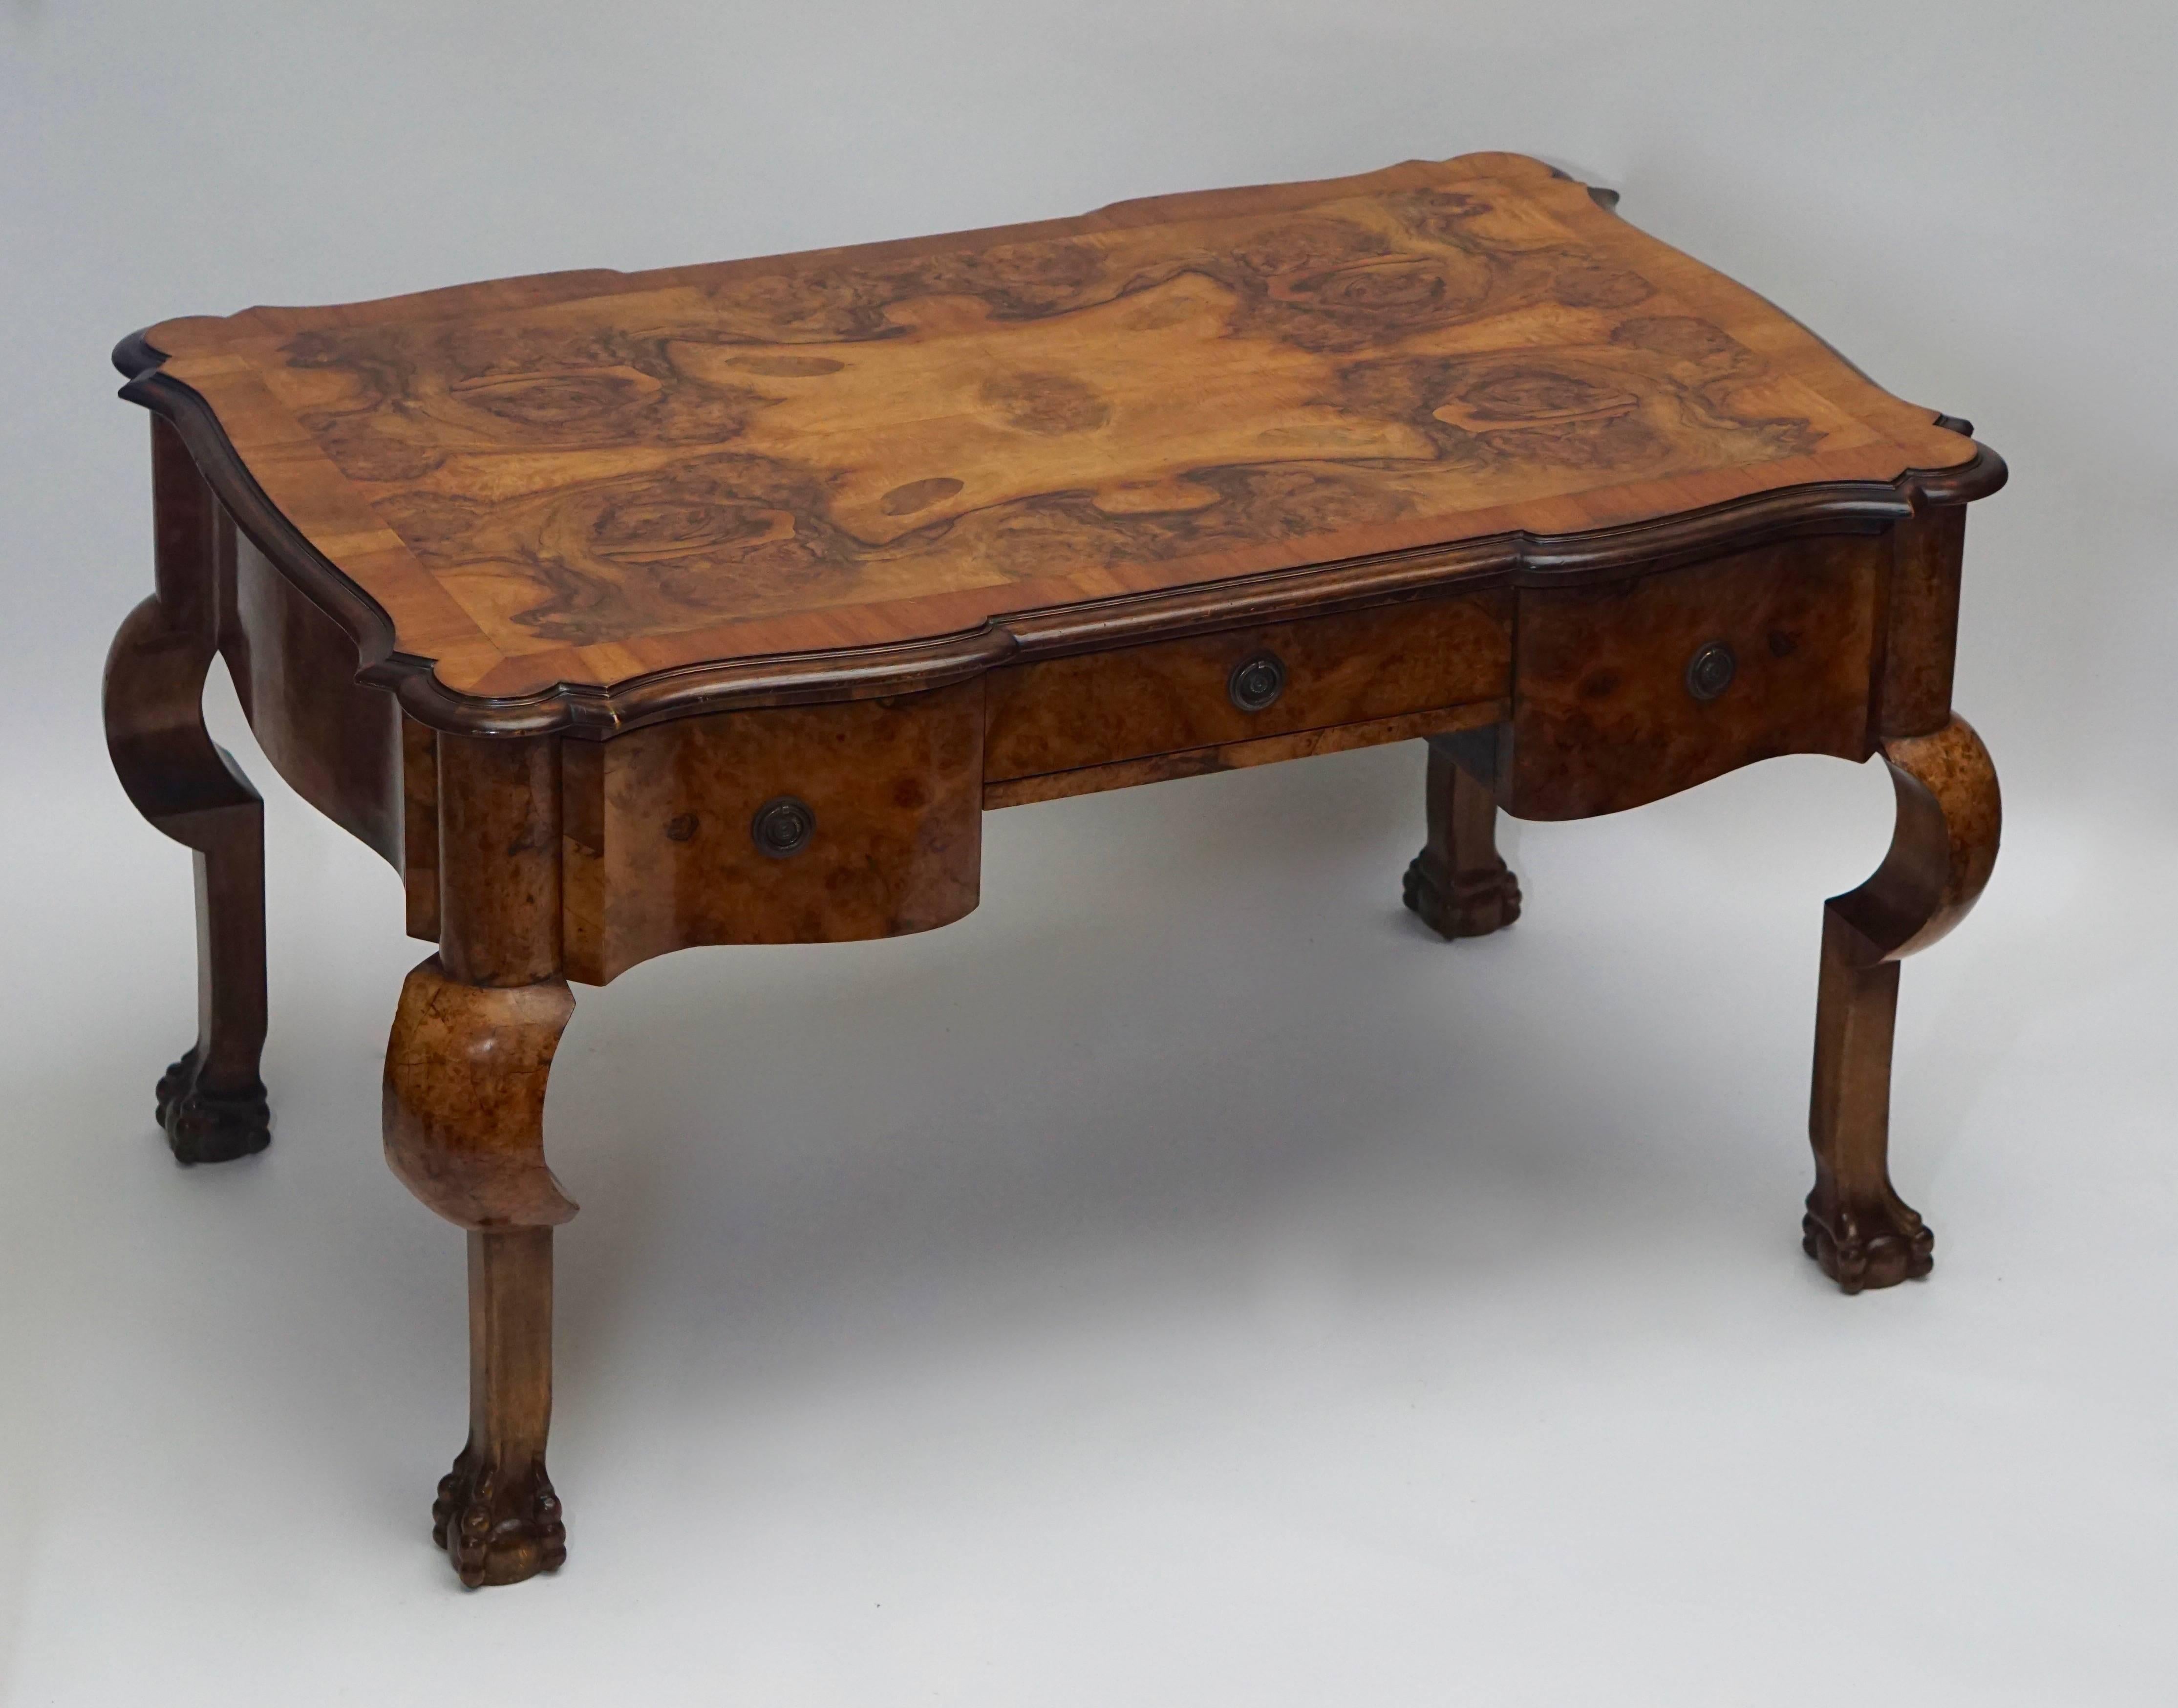 Magnificent 19th century burled walnut partners desk with original armchair and claw legs.

19th century burl walnut partners writing desk with armchair. This desk has functional curved drawers on both sides, a true partner's desk. This desk is